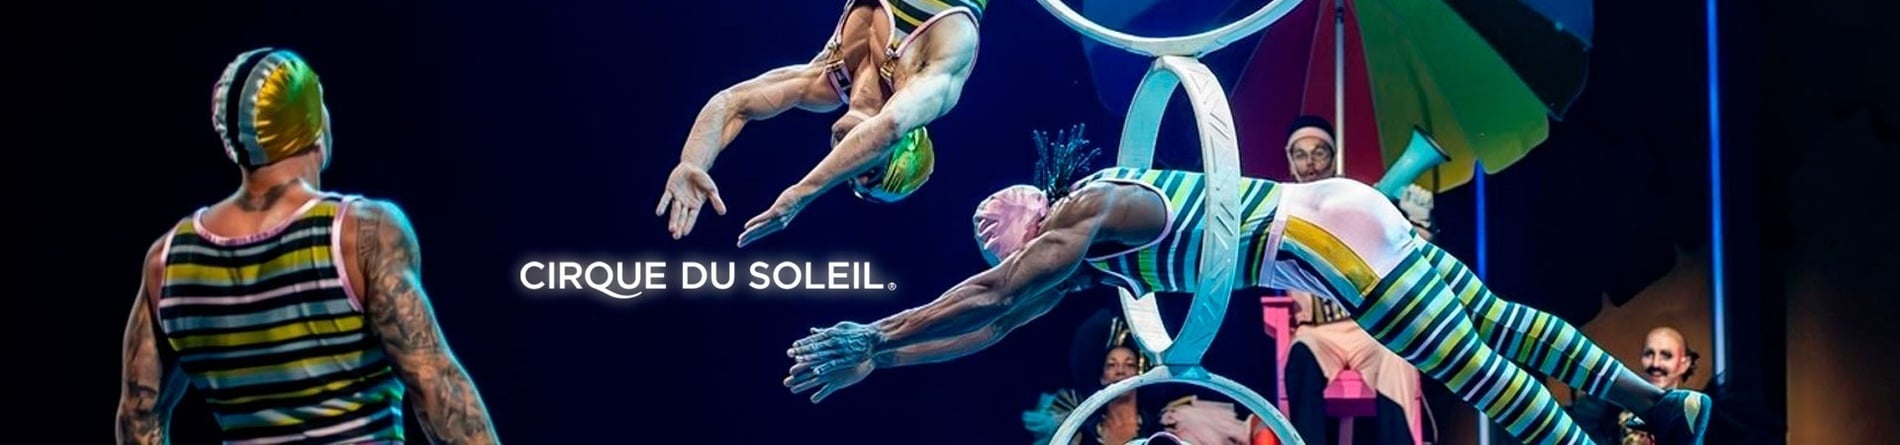 a cirque du soleil poster shows a group of performers